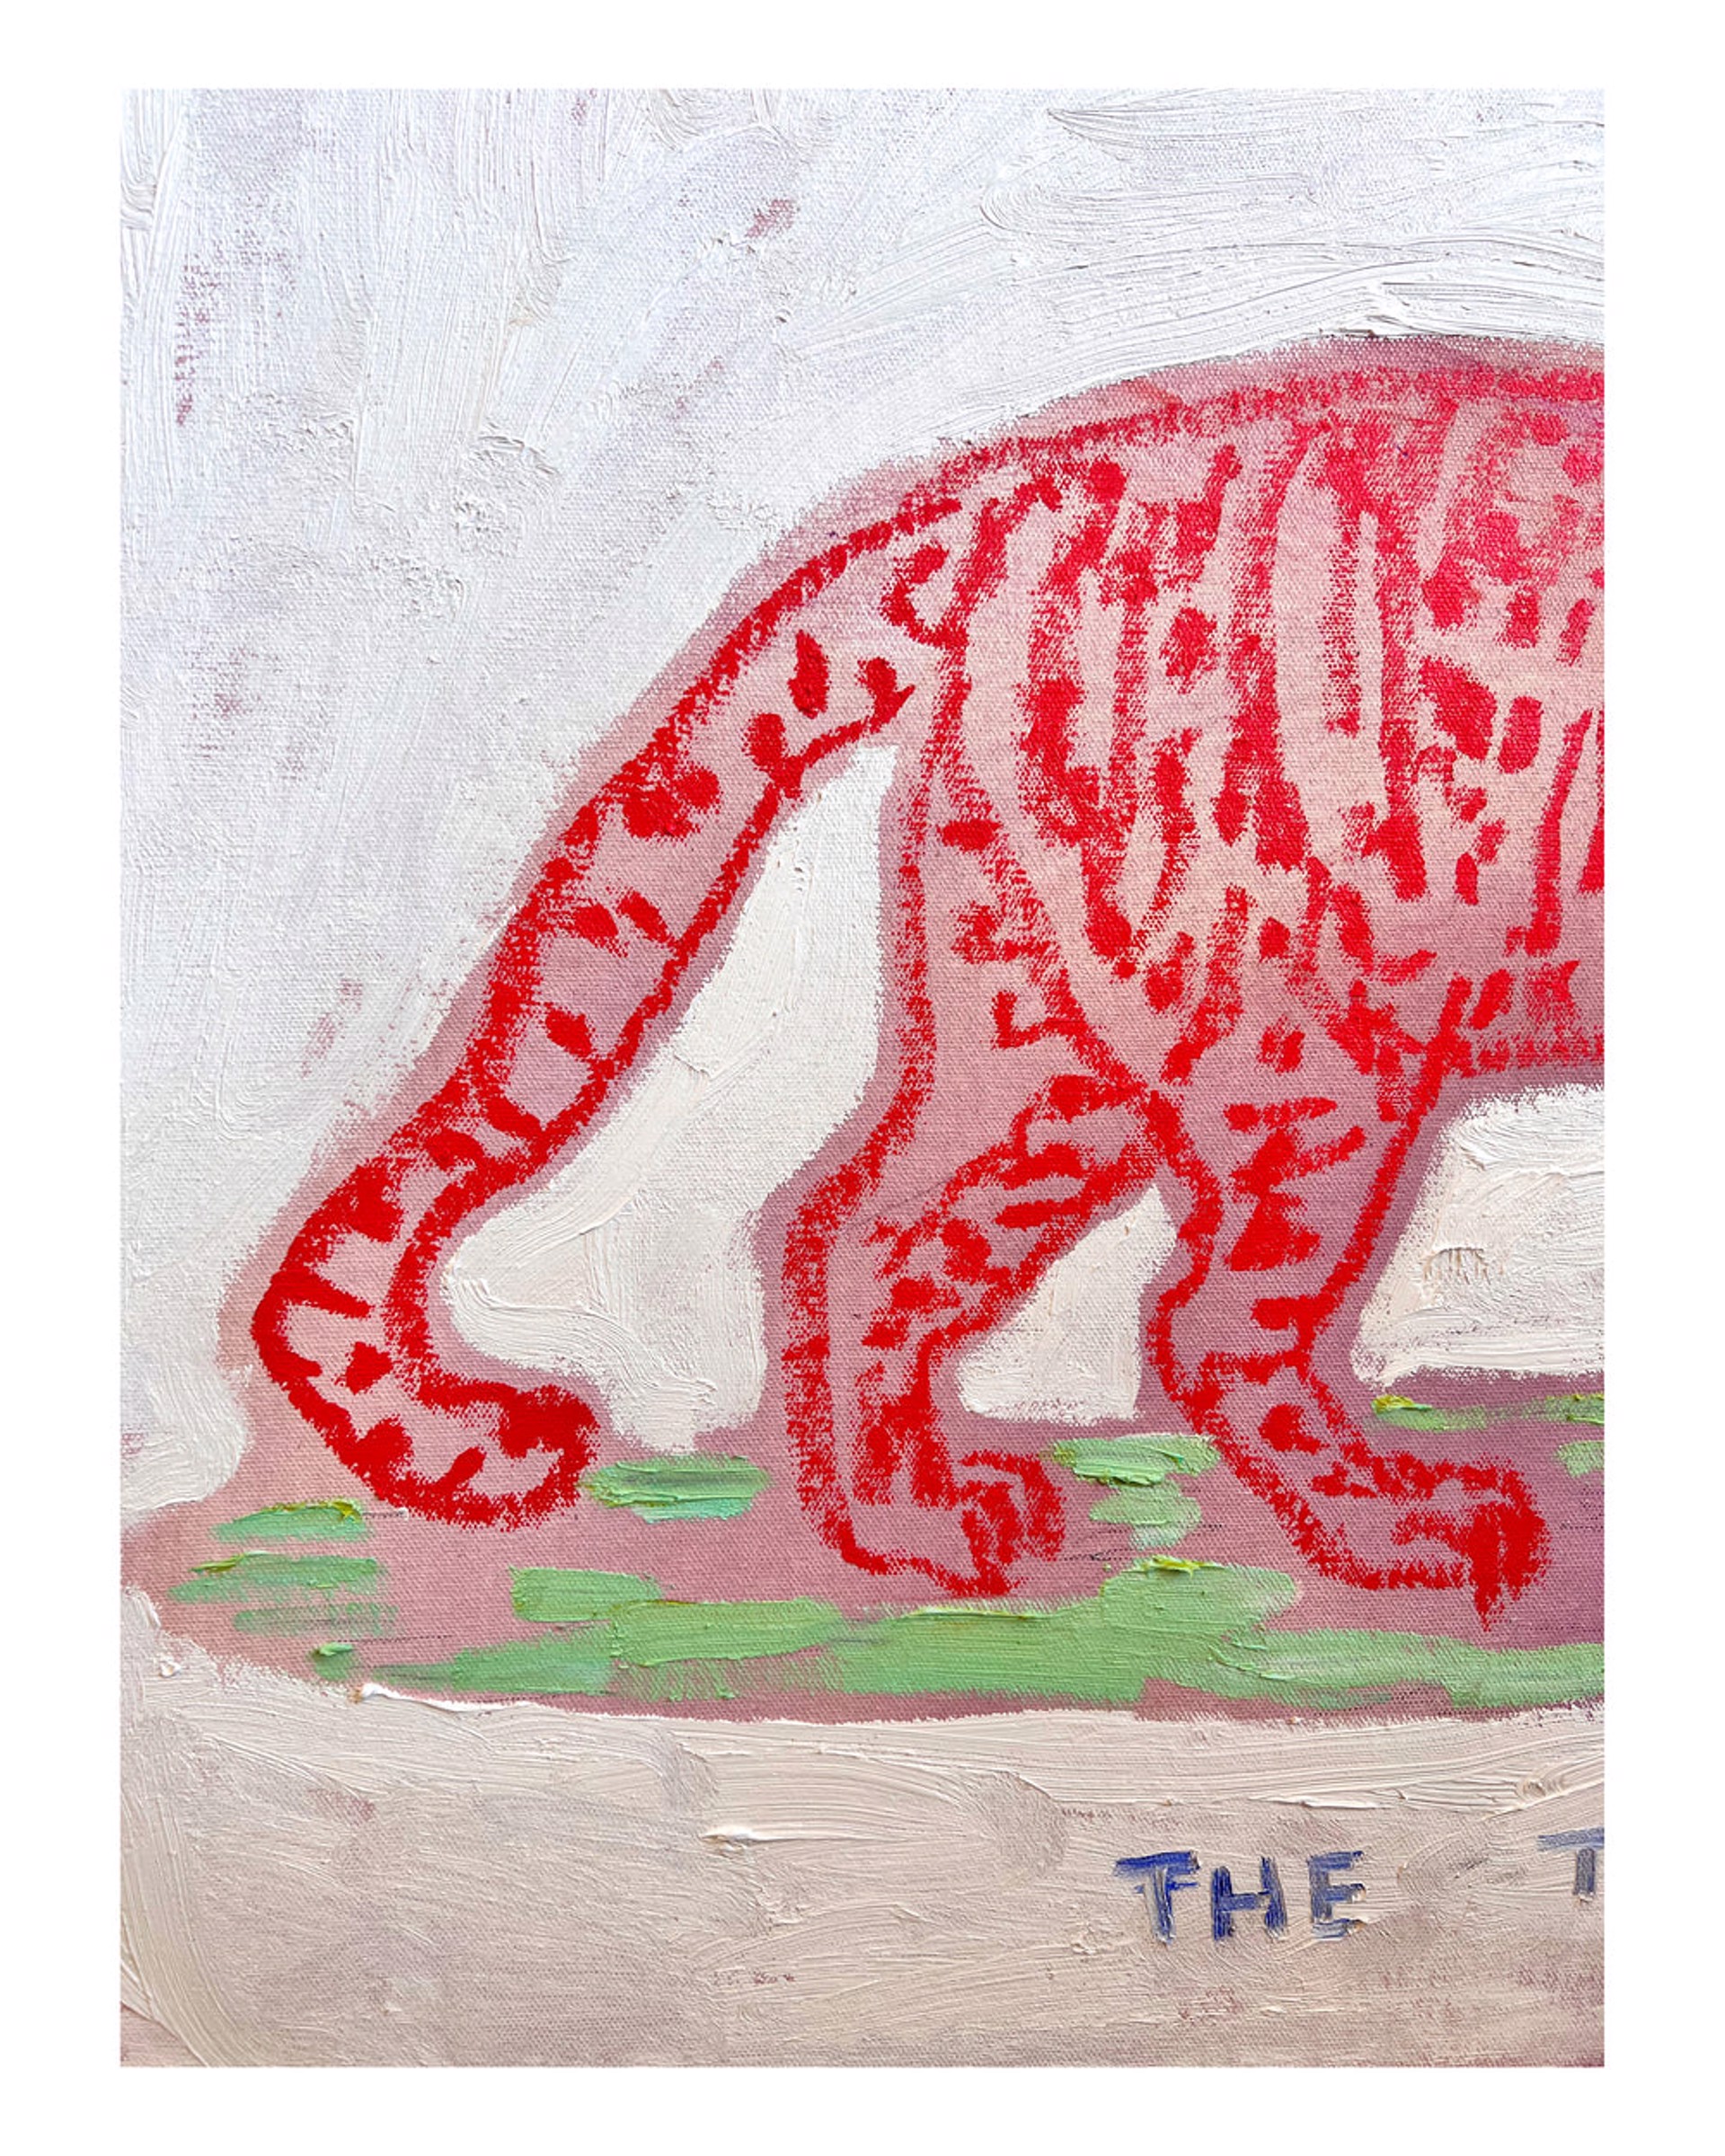 The Tiger, Scarlet by Anne-Louise Ewen